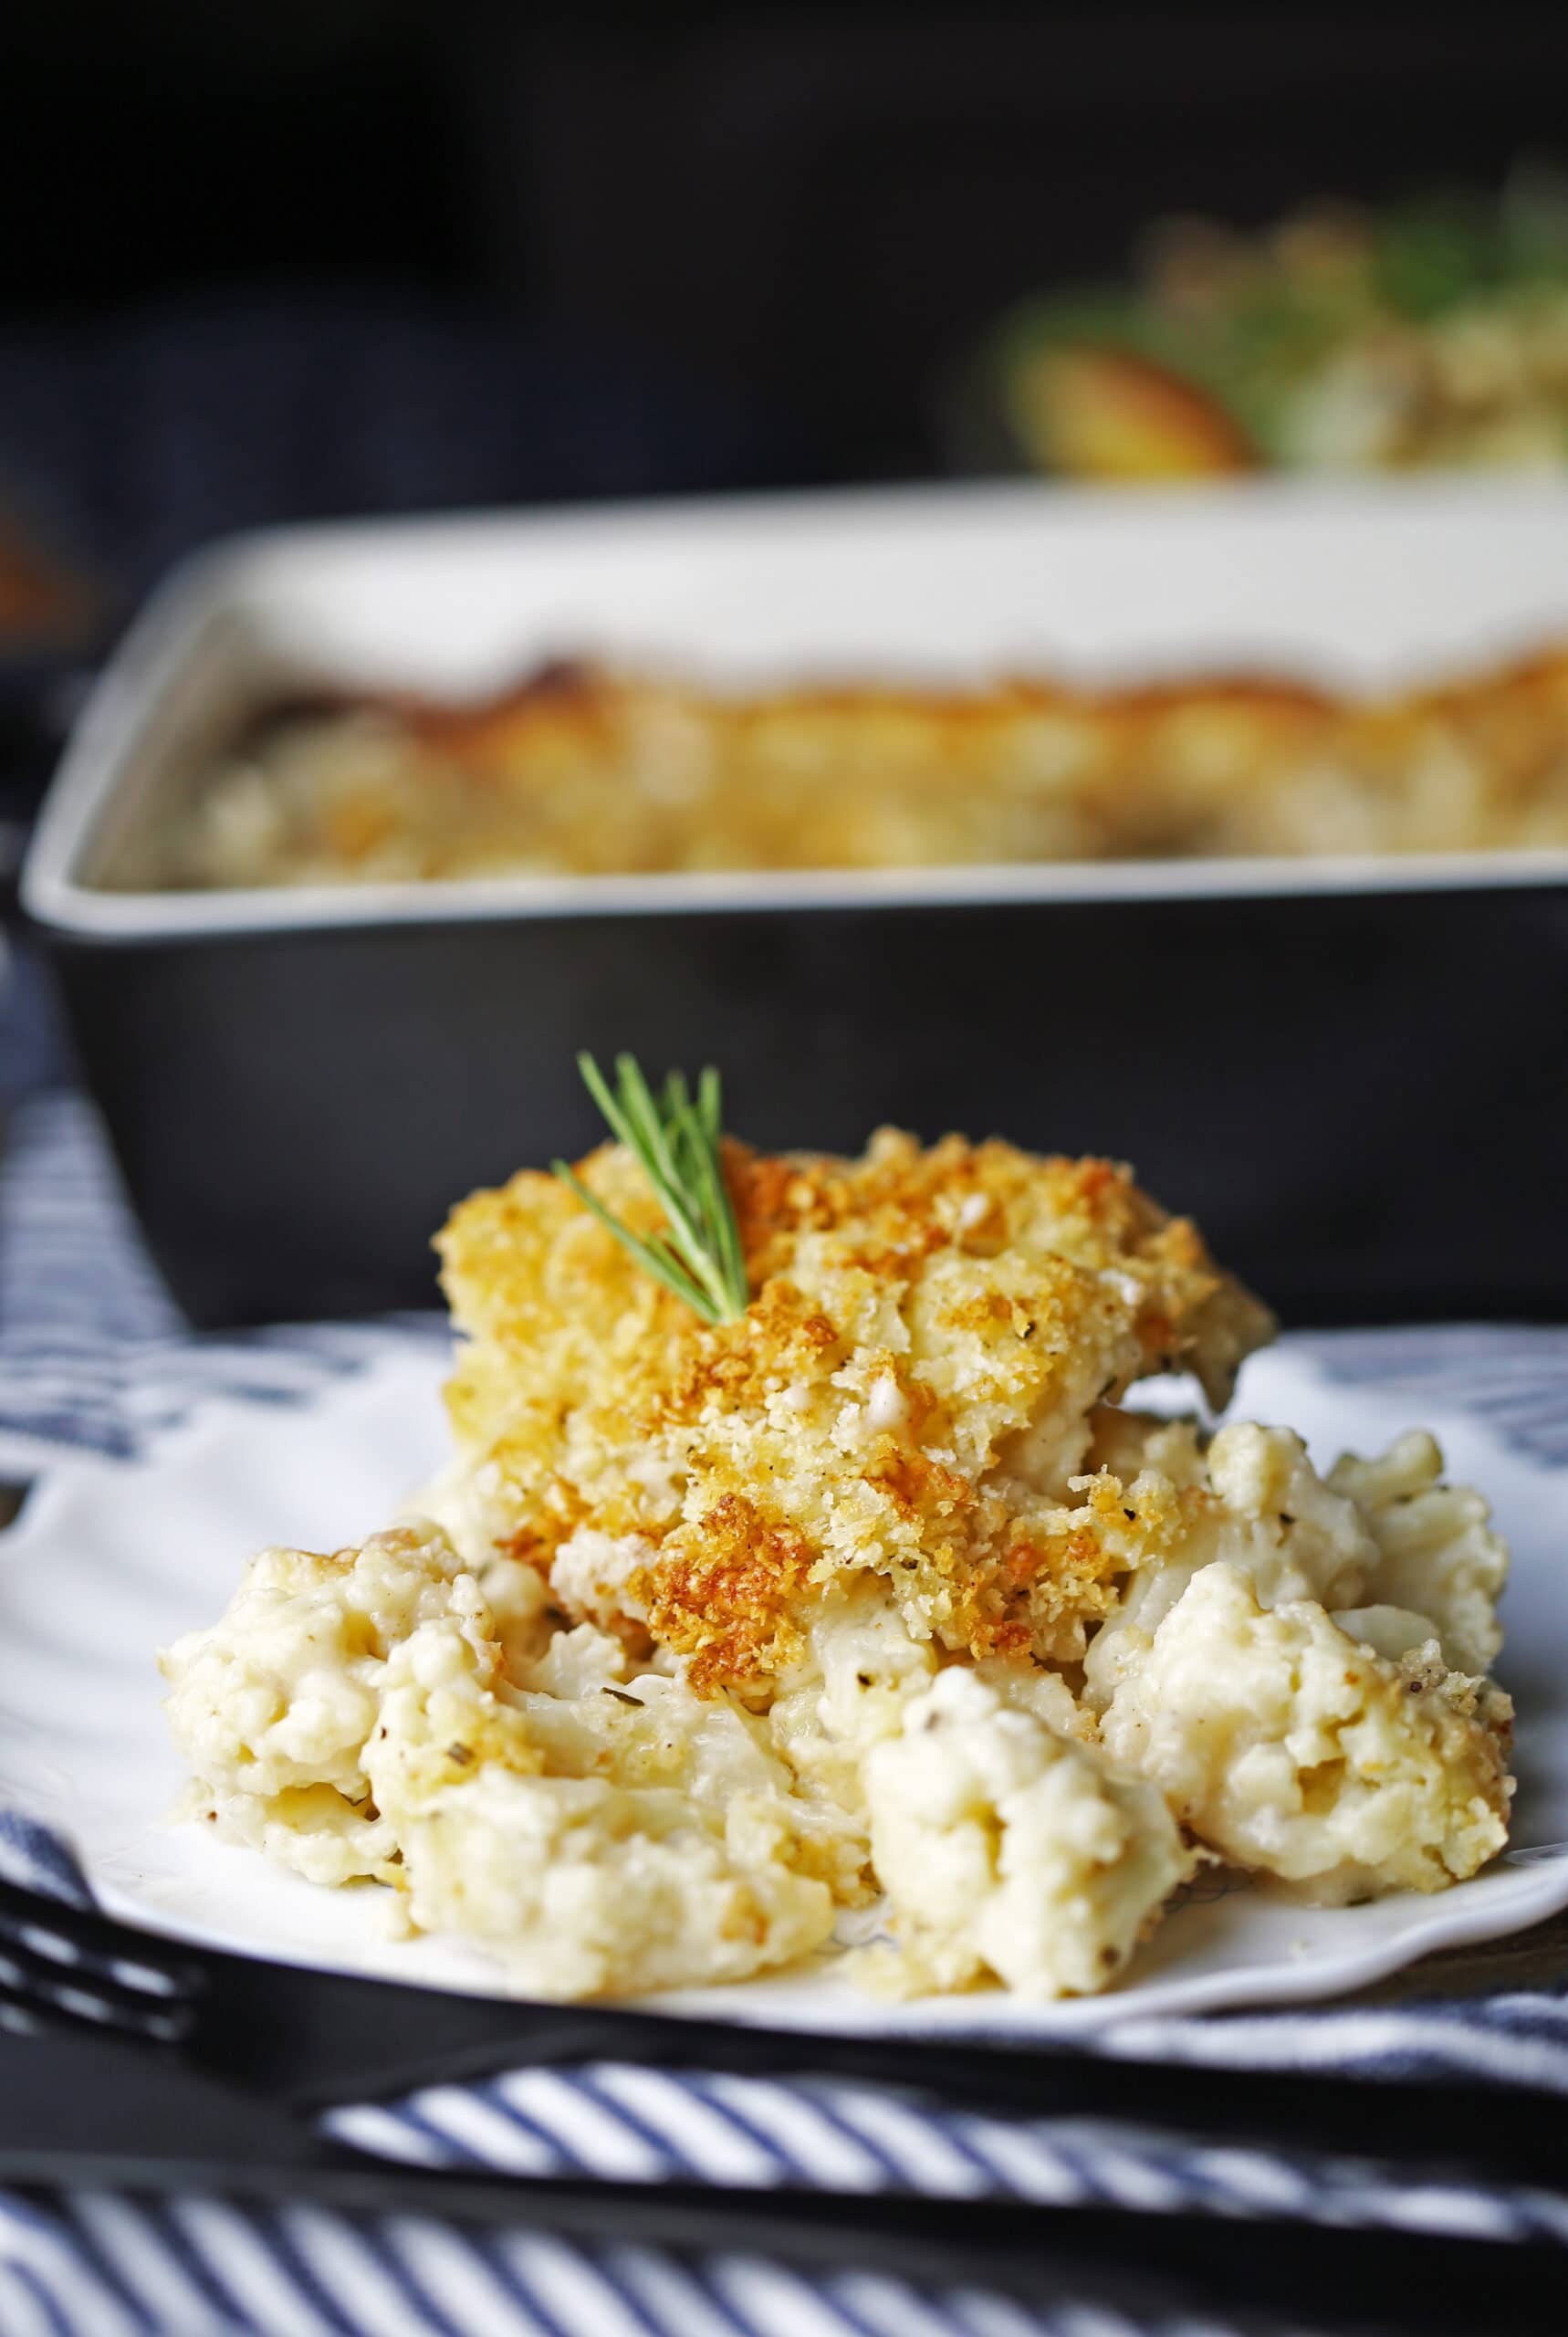 A side view of a hearty scoop of cauliflower gratin on a white plate.